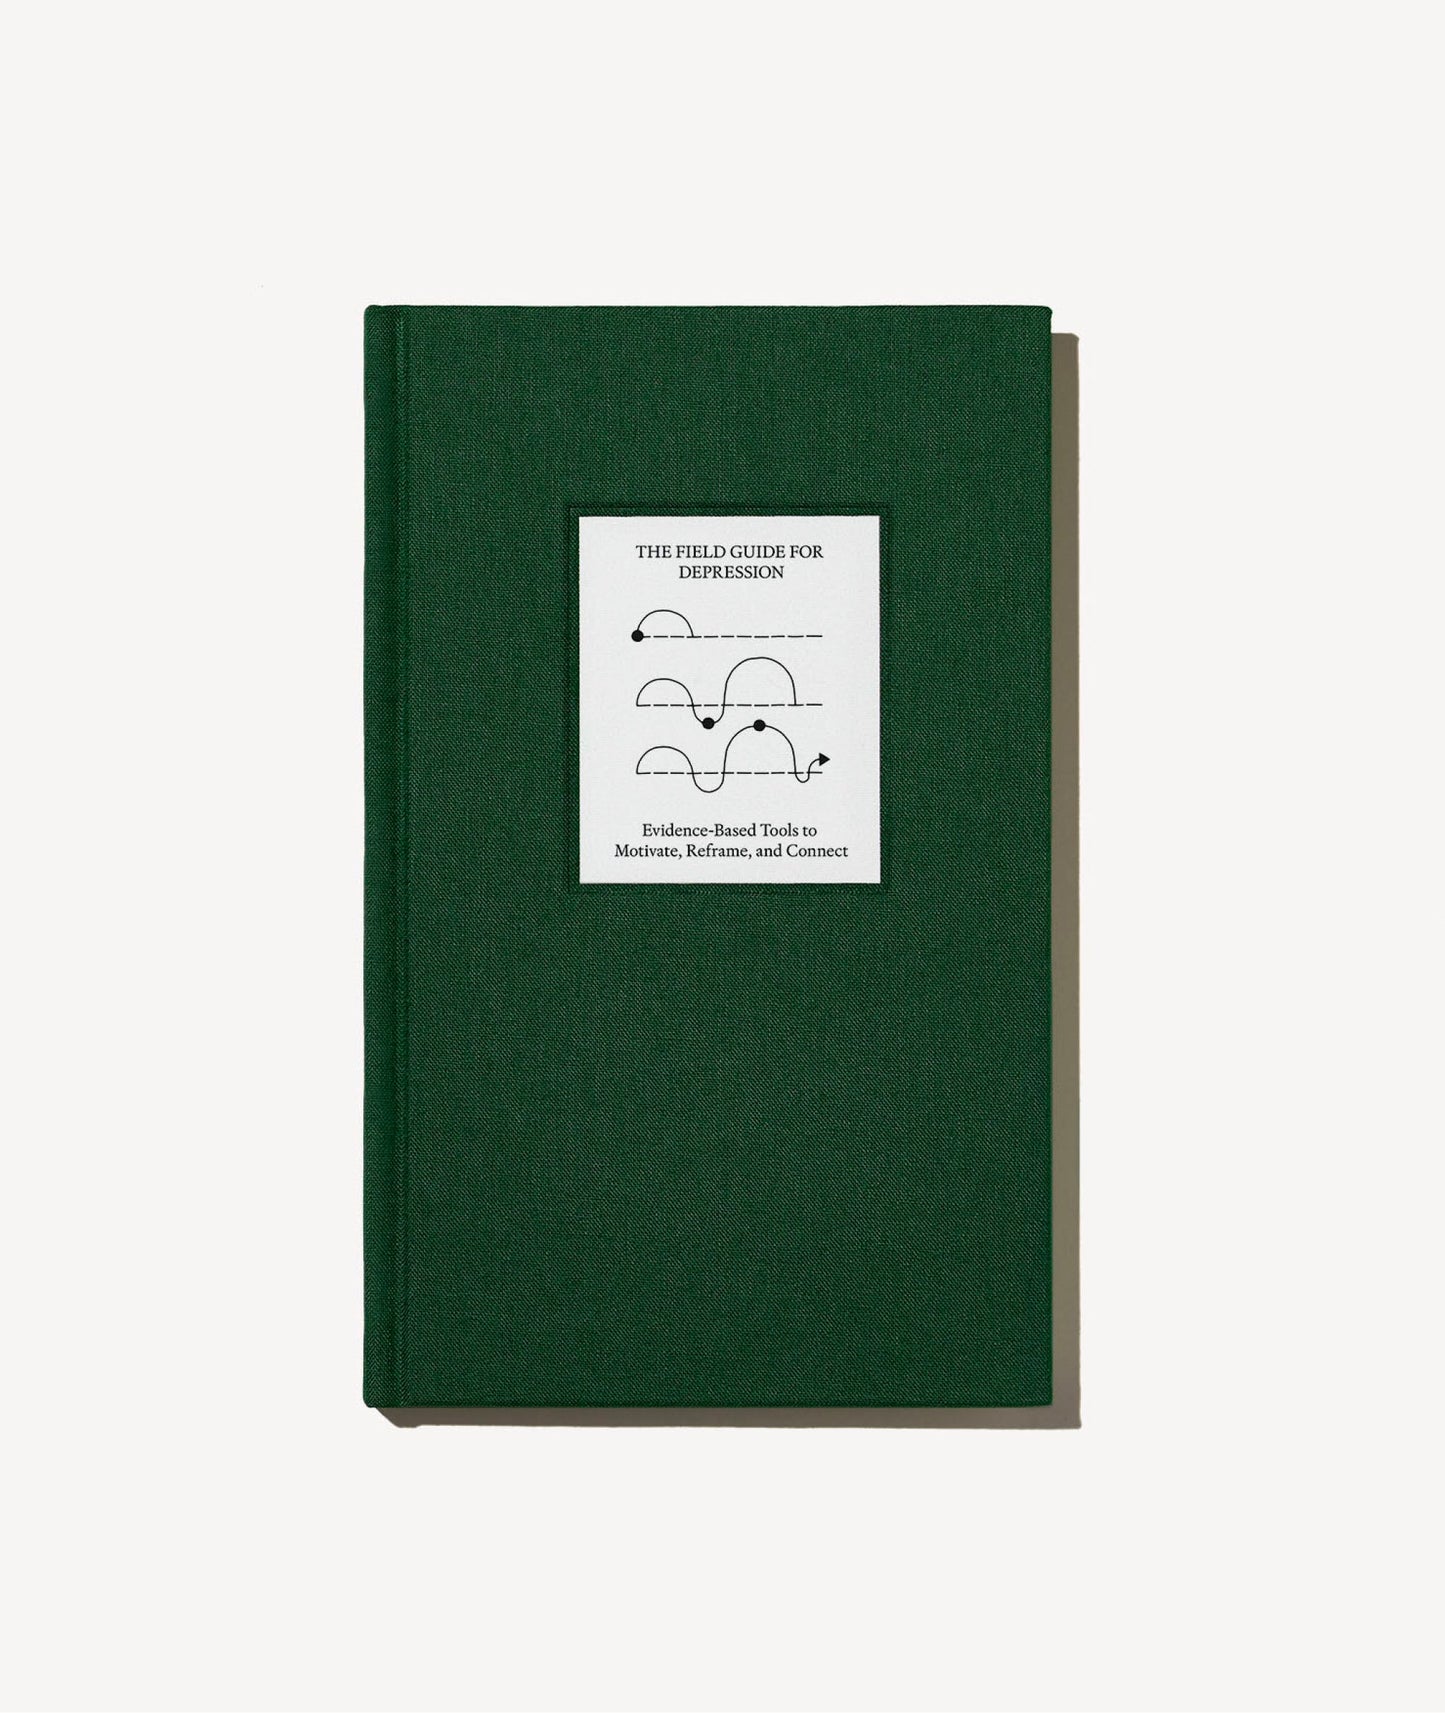 The Complete Collection by Therapy Notebooks